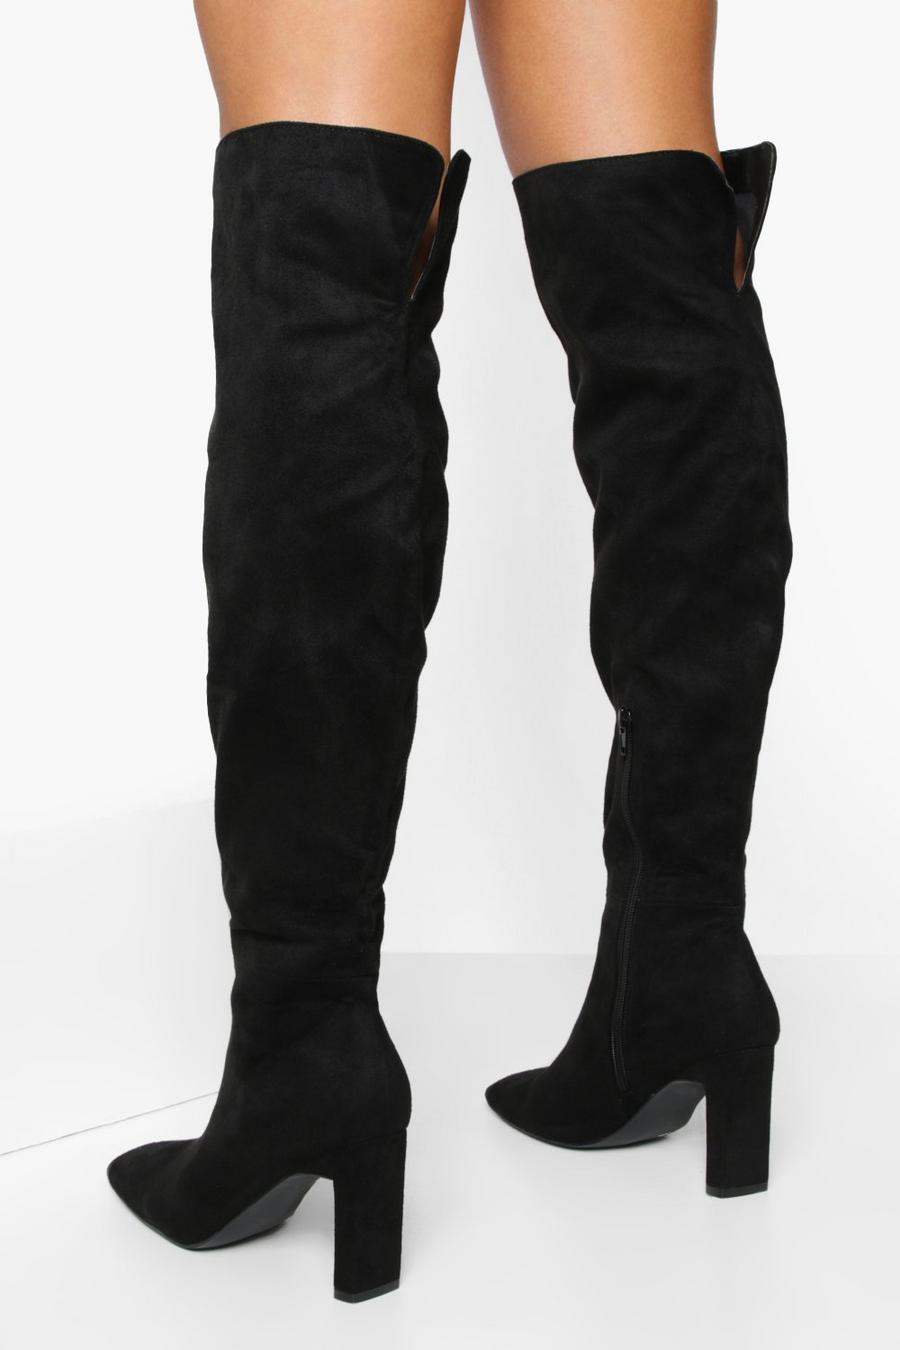 Black Square Toe Thigh High Boots image number 1